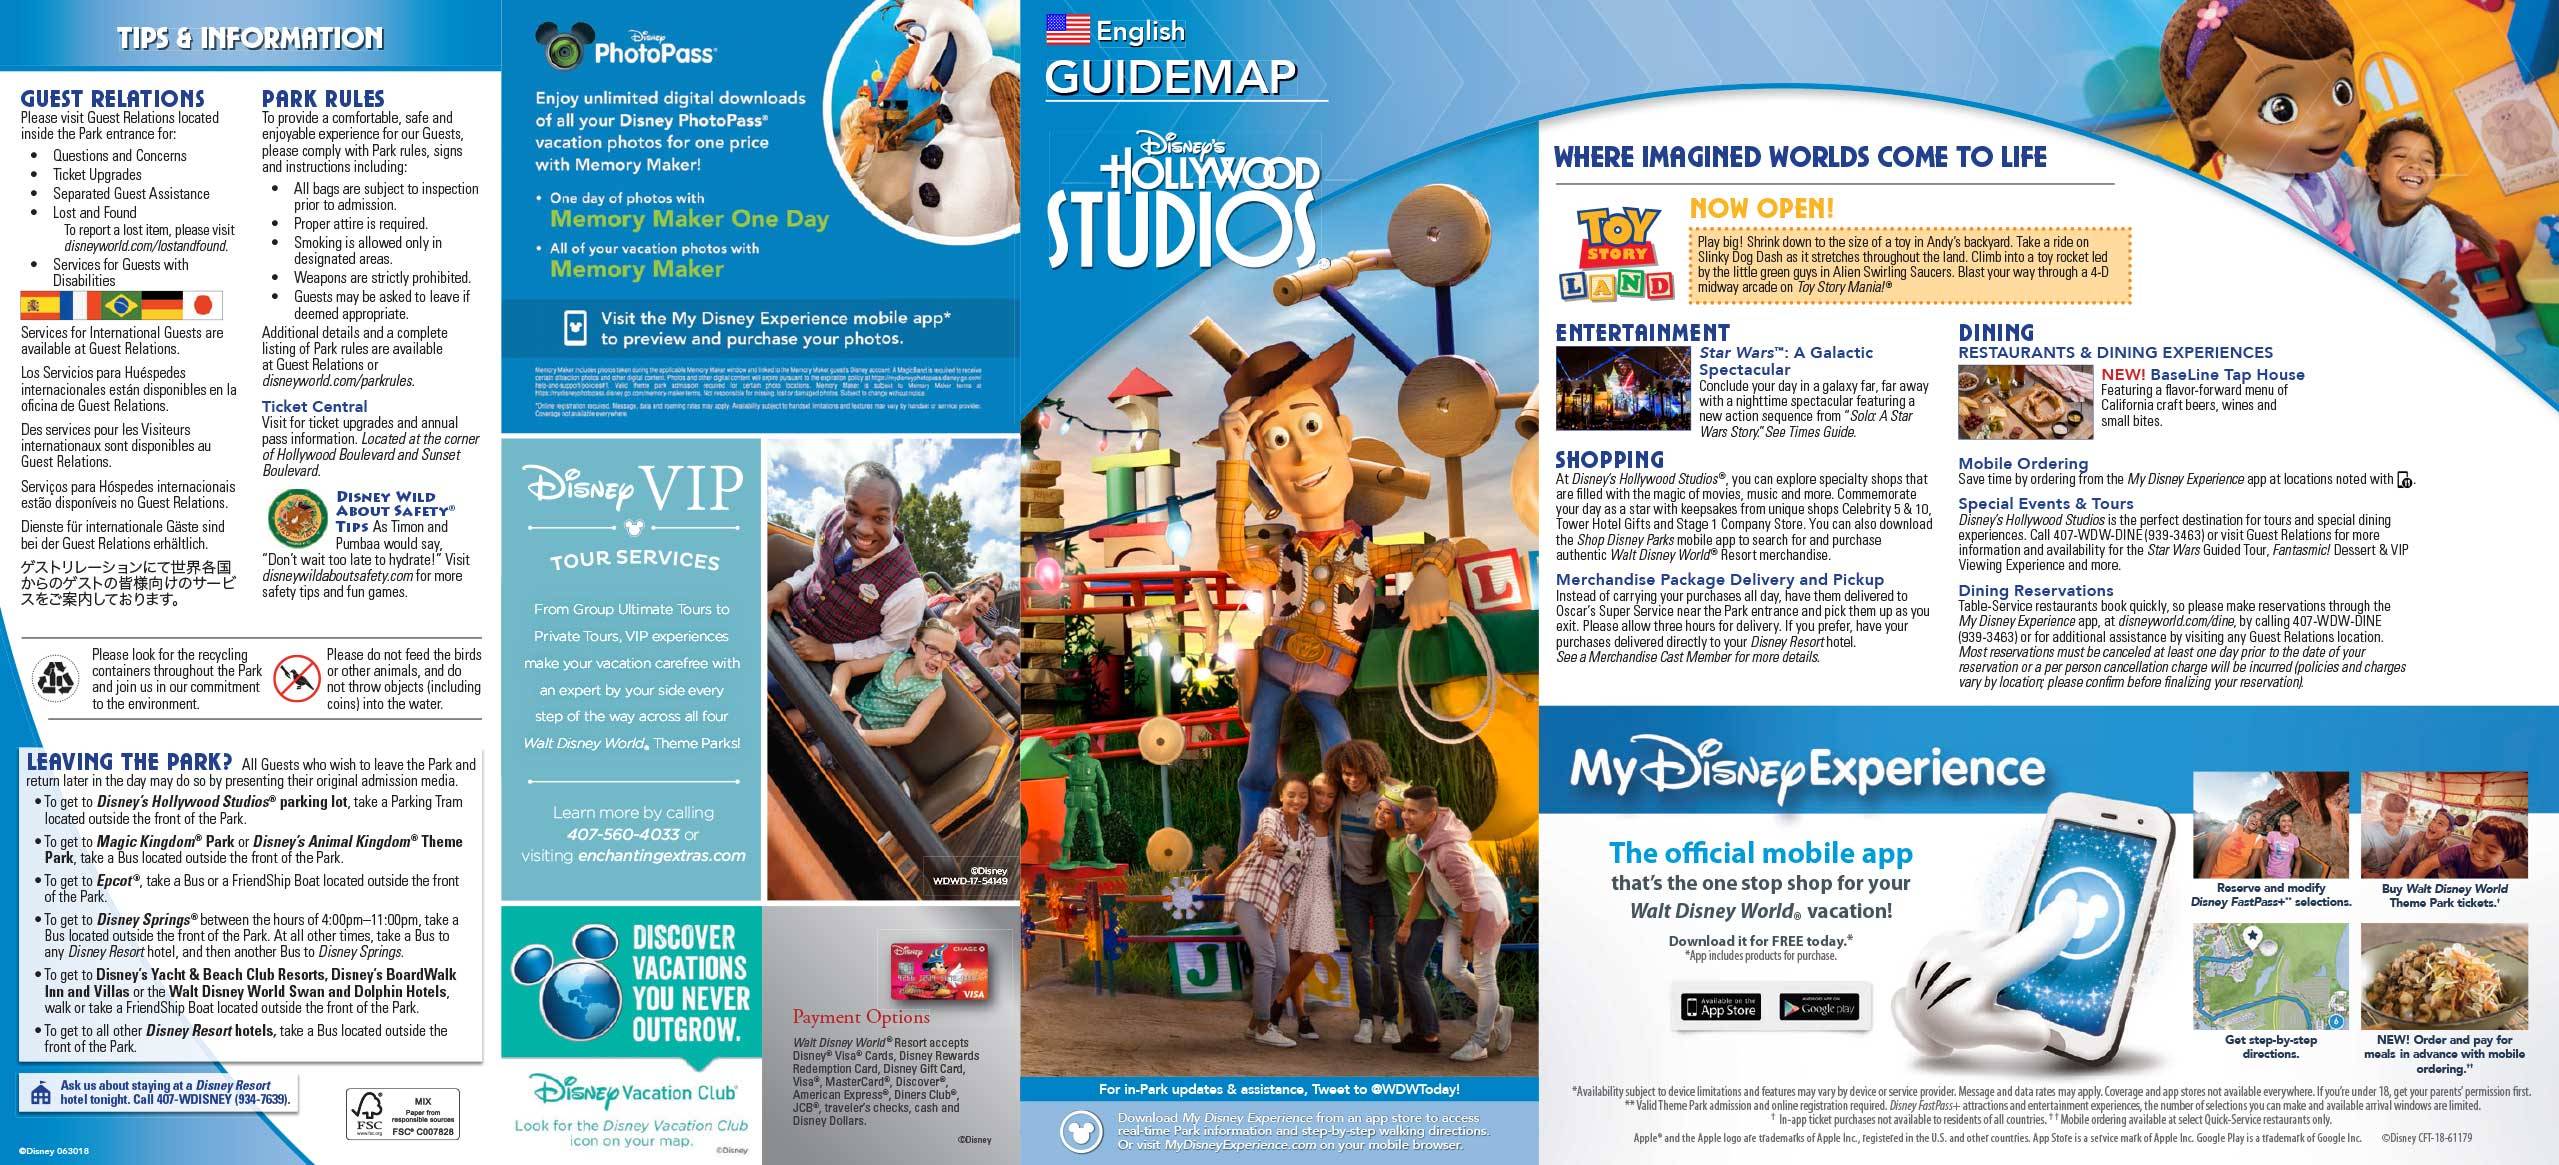 New Guide Map for Disney's Hollywood Studios with Toy Story Land